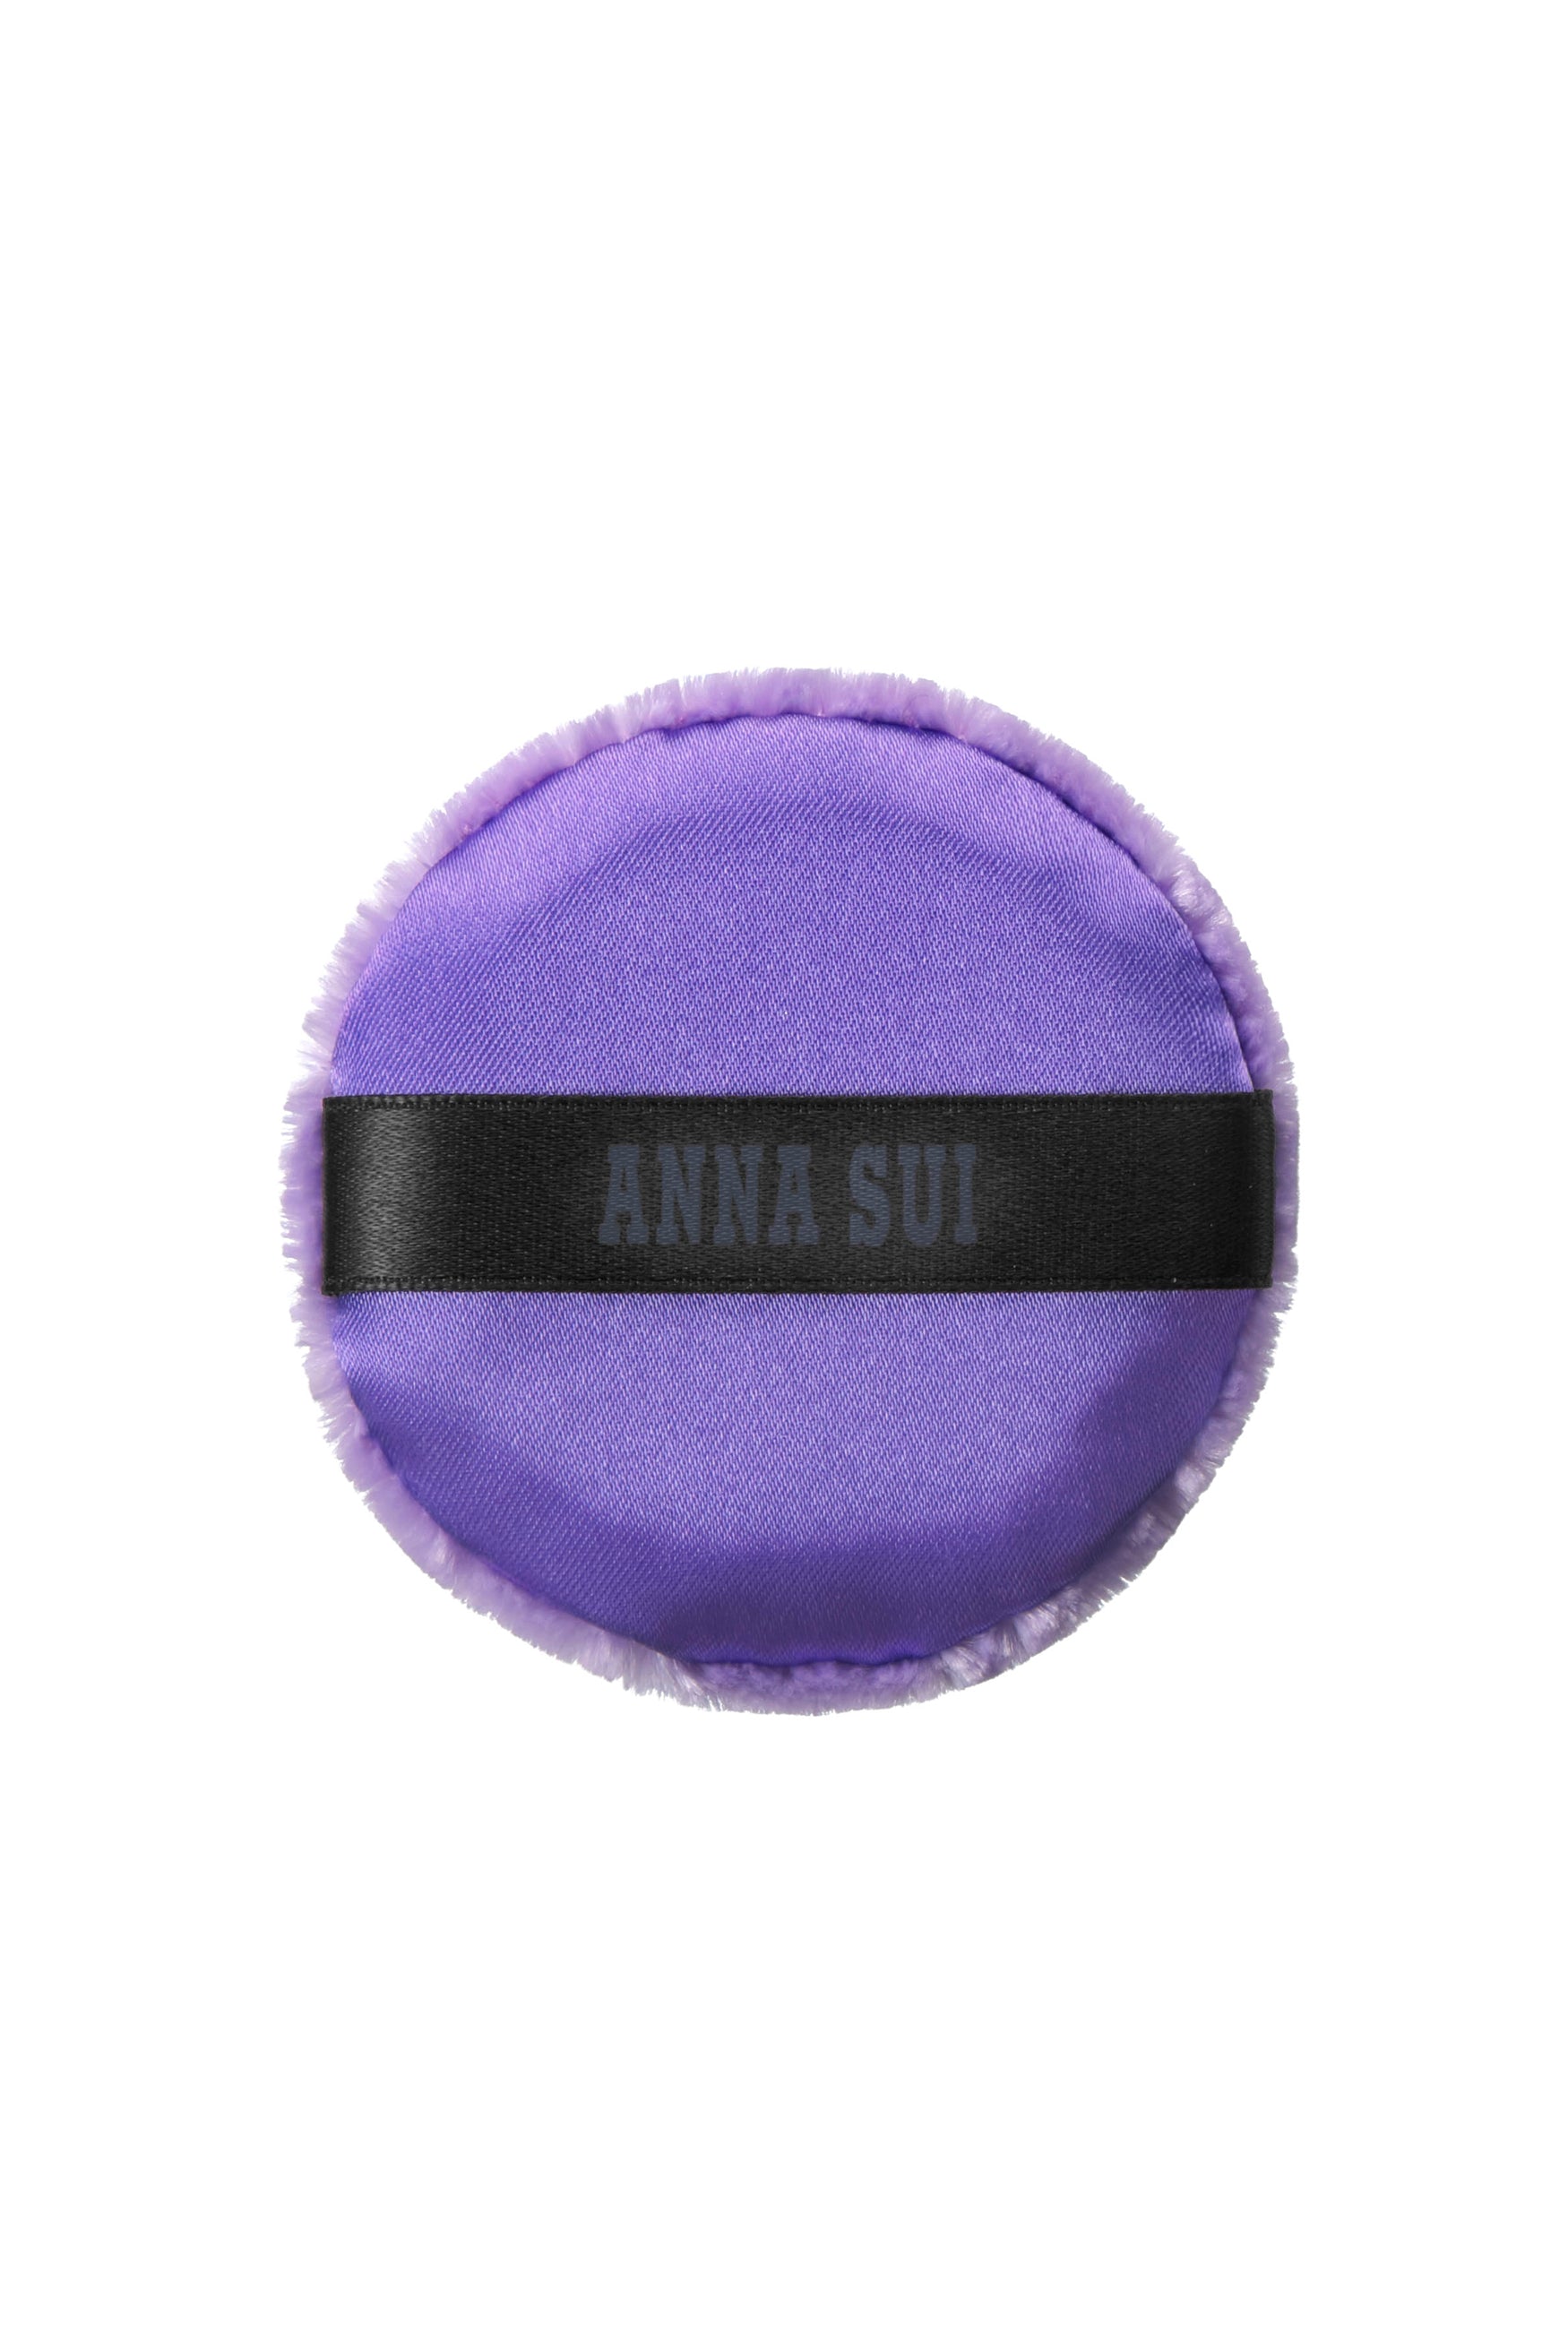 Soft powder mini purple puff with a black ribbon and Anna Sui label in grey fonts